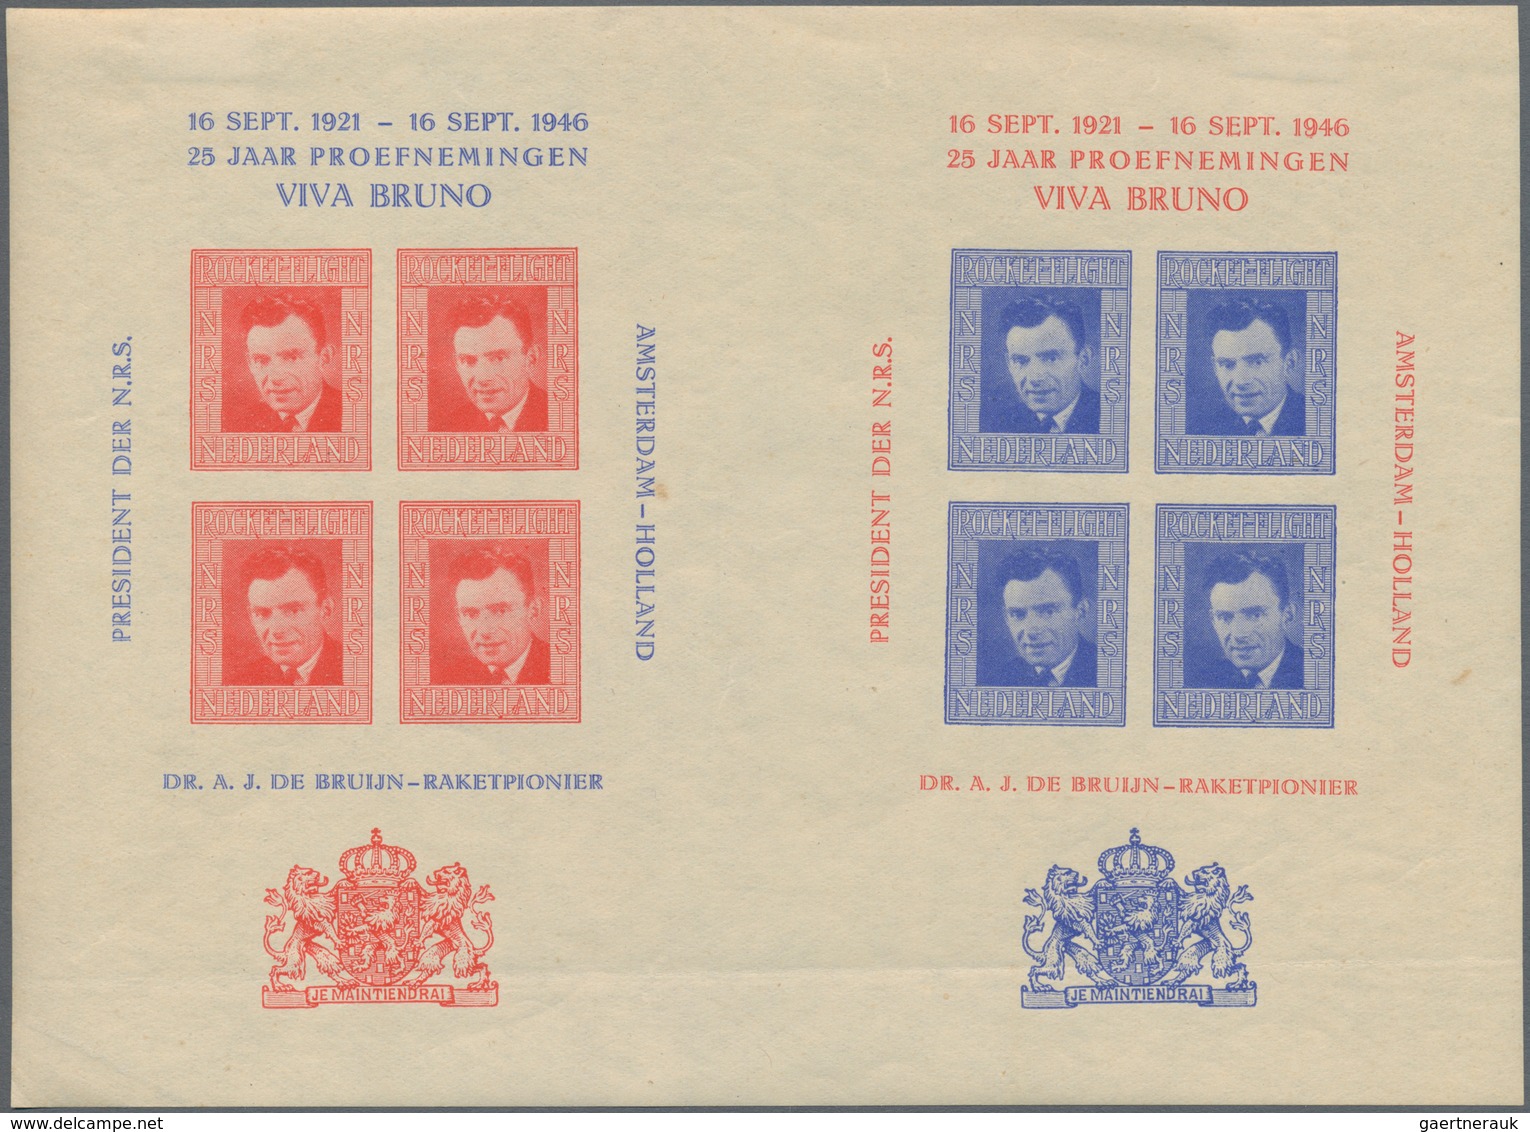 Raketenpost: 1945-1960 Rocket Mail: Specialized collection of 30 covers of Dutch rocket mail and 142